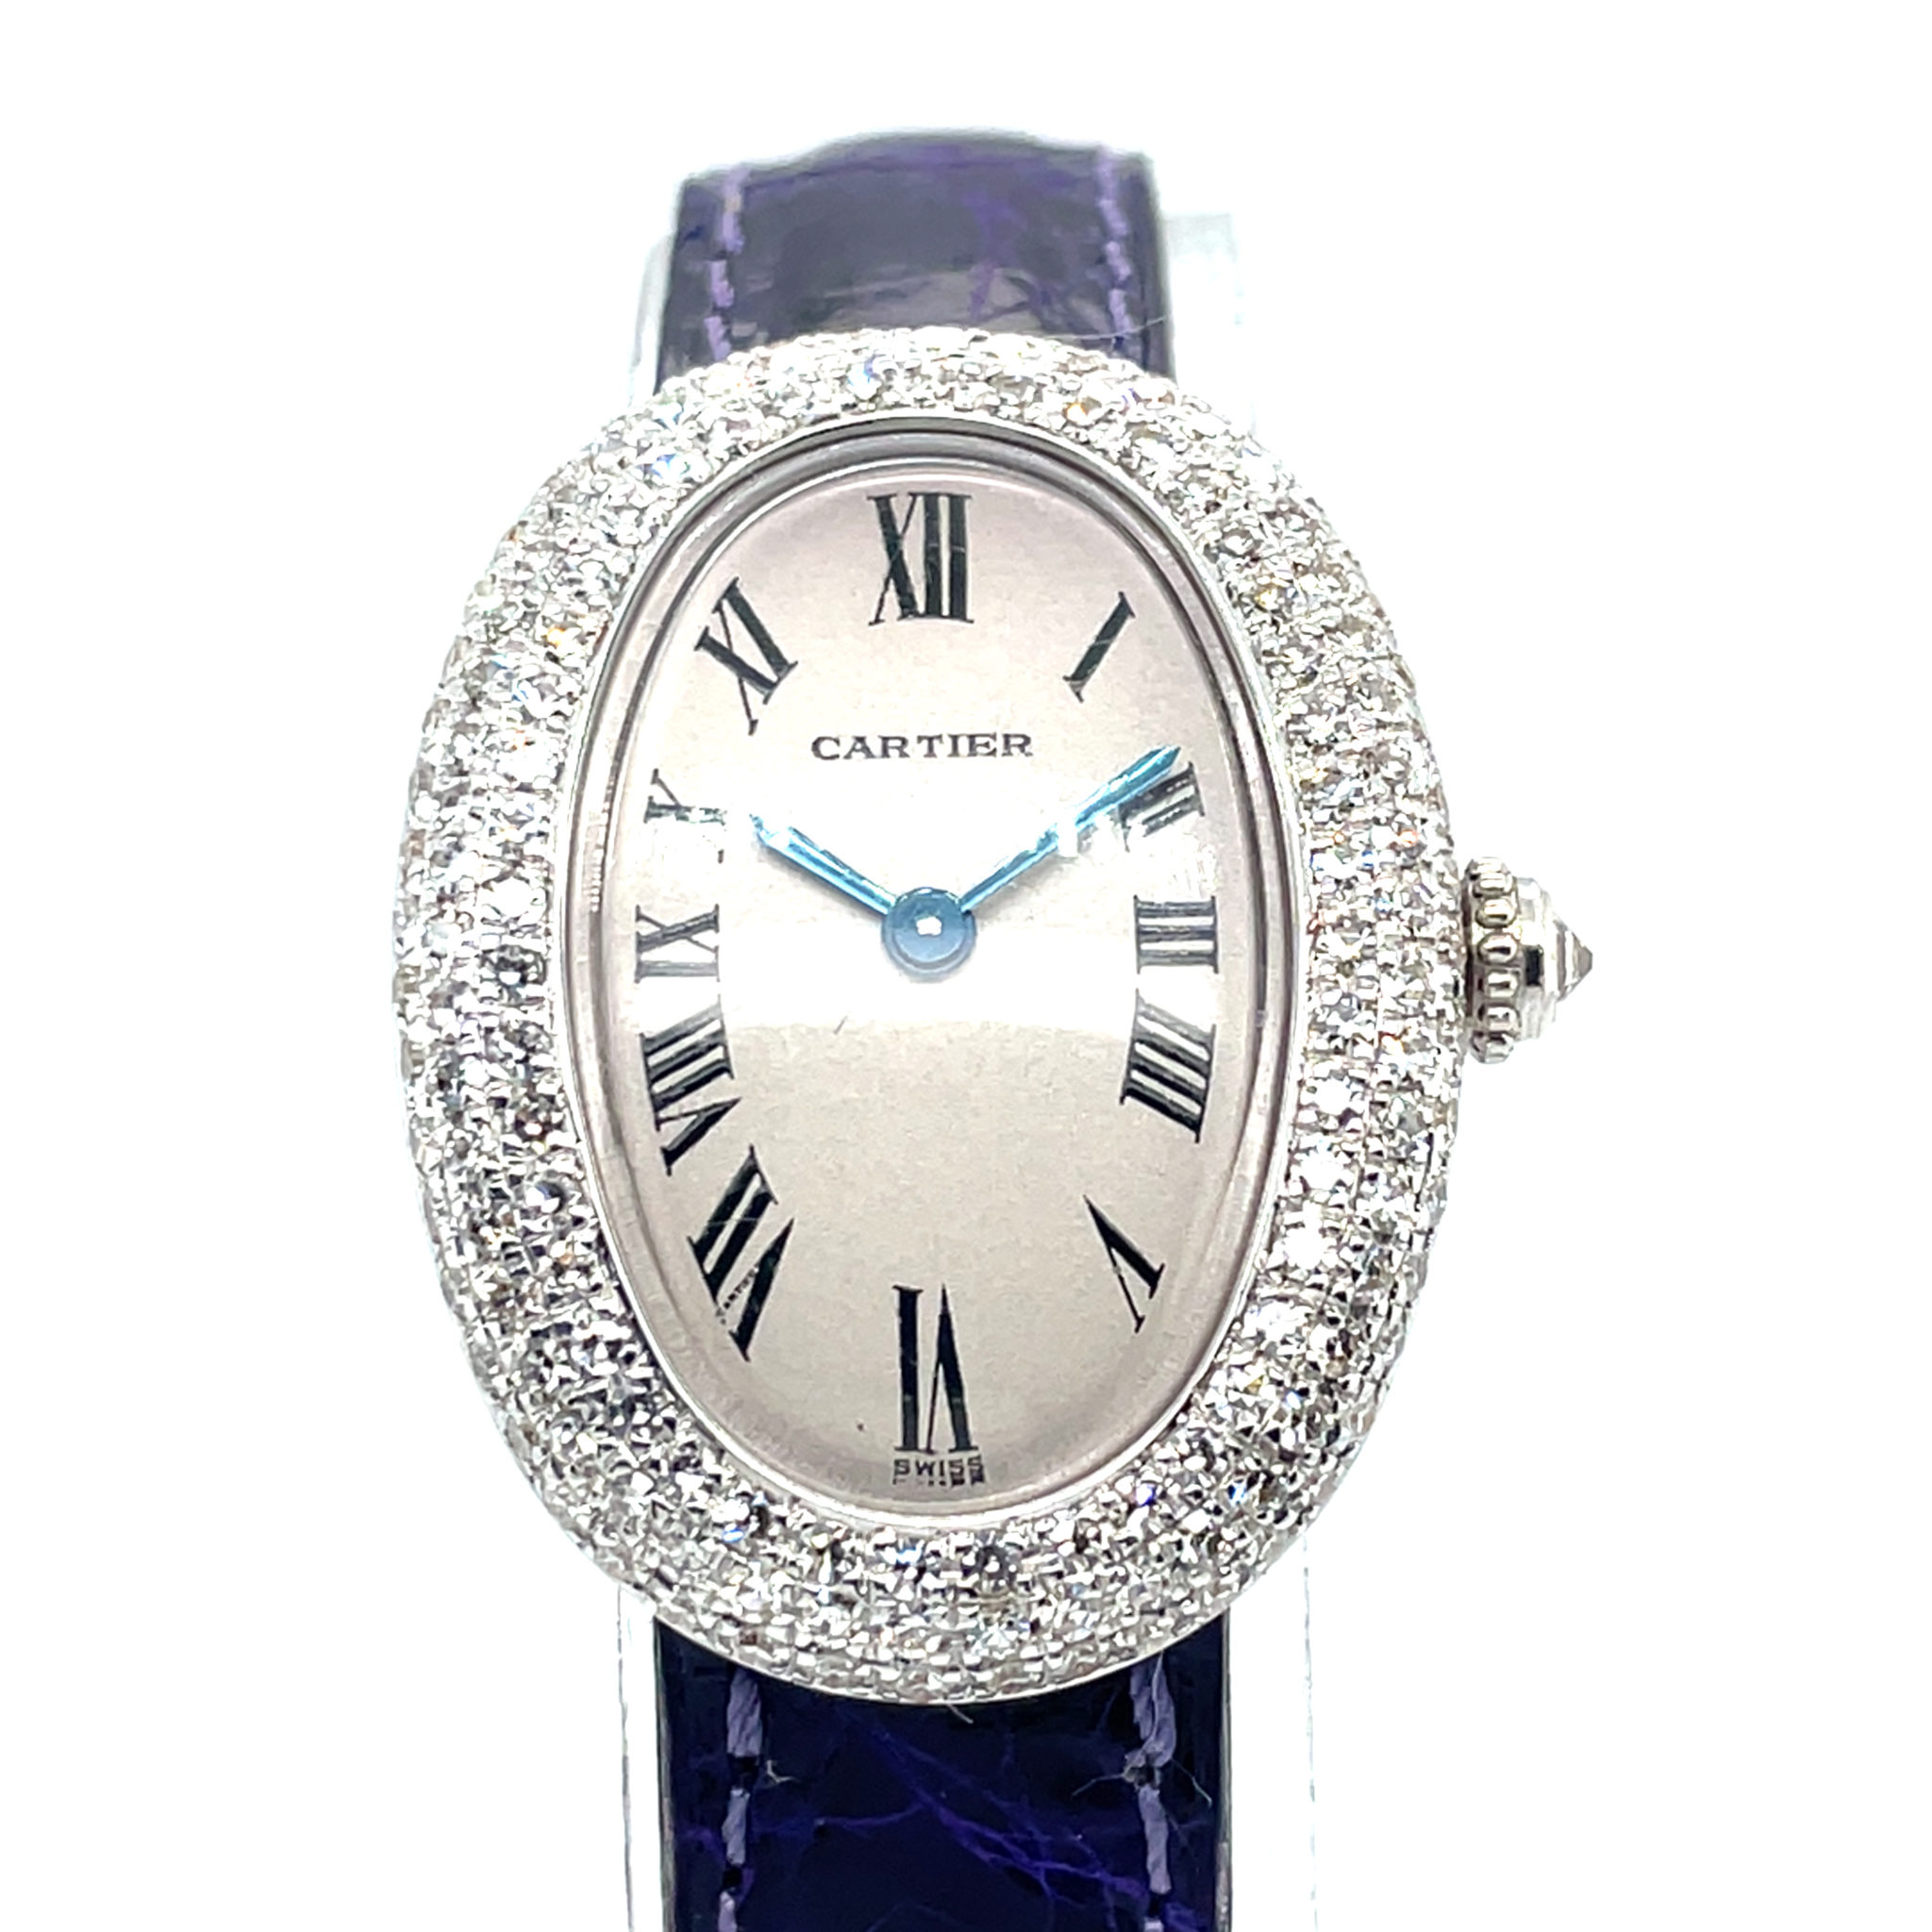 Cartier Baignoire Lady white gold Diamond Watch Ref. 8660-44 factory setting 1989 Papers